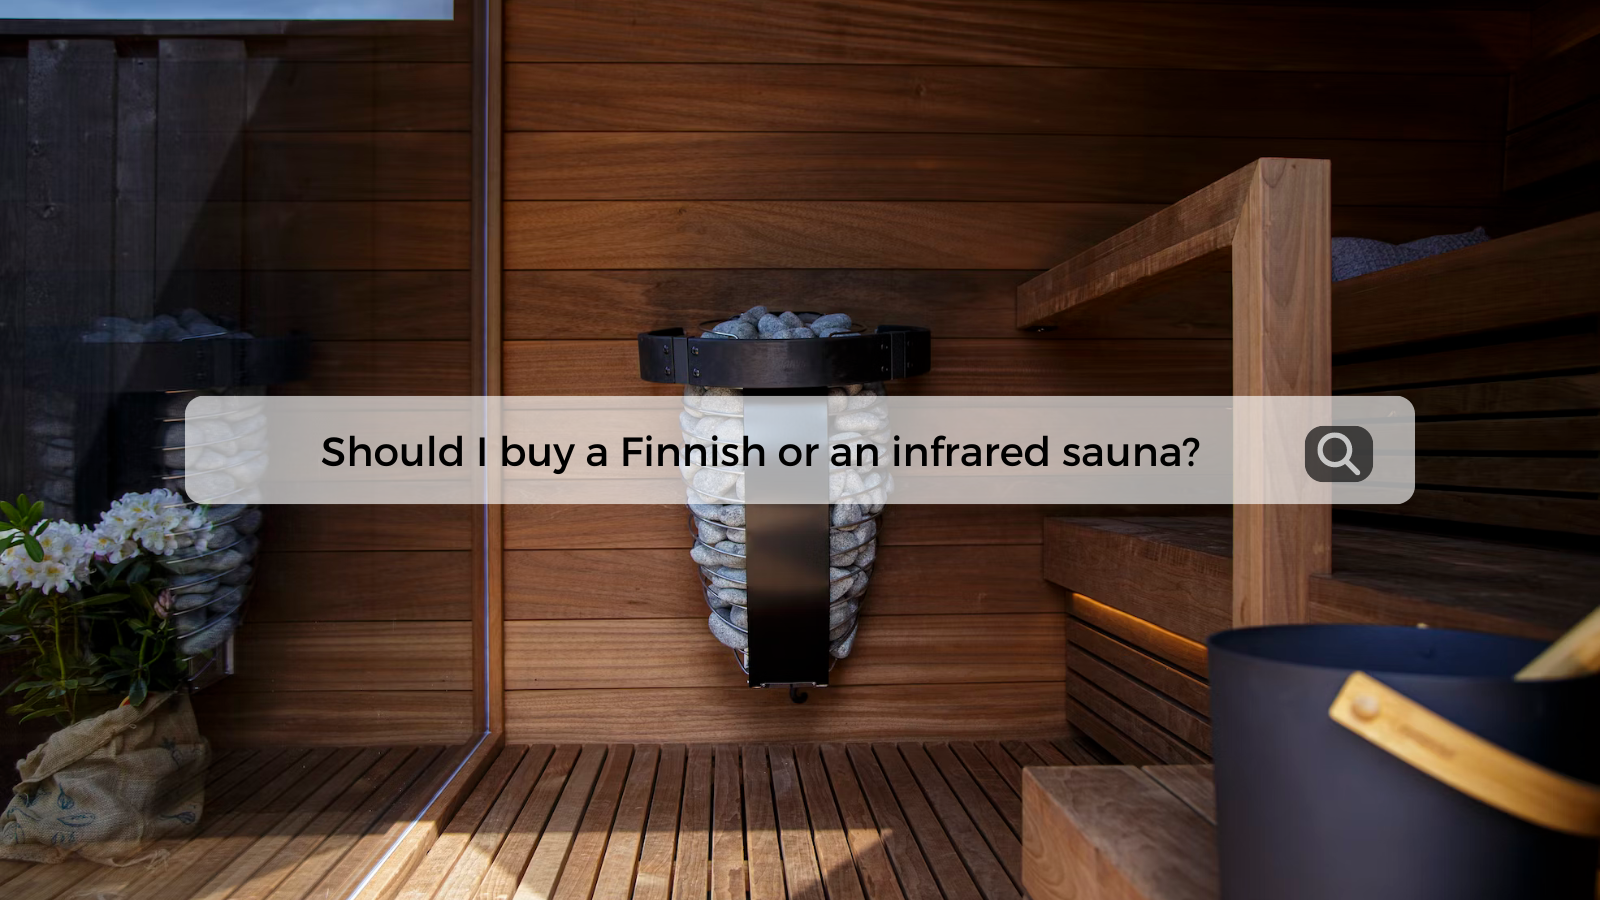 Should I buy a Finnish or an Infrared sauna?